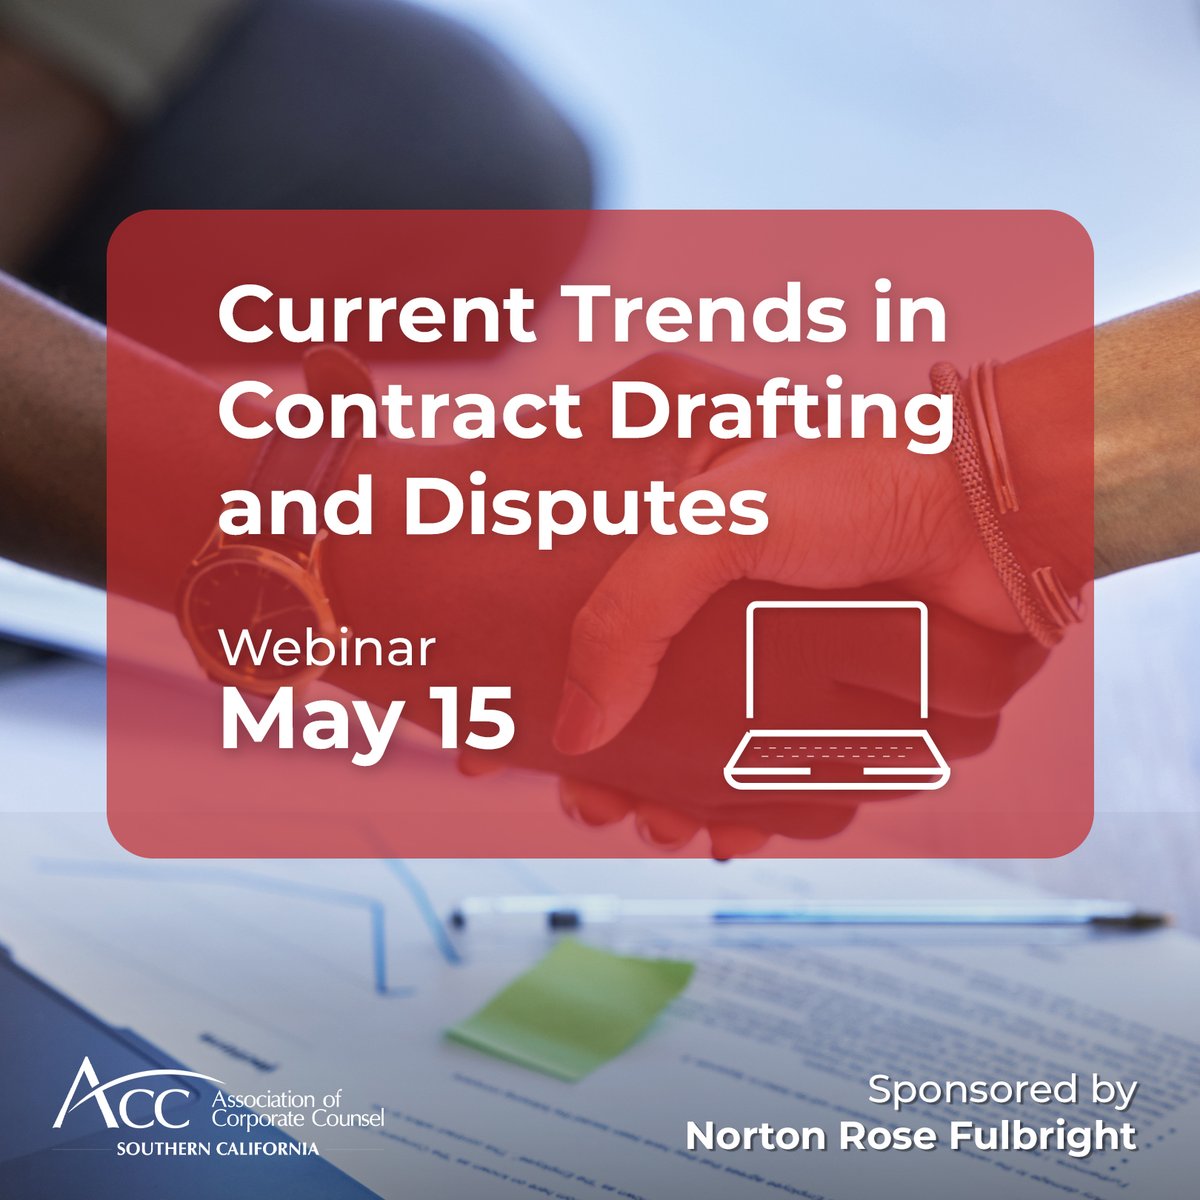 UPCOMING WEBINAR

Current Trends in Contract Drafting and Disputes

Click Here To RSVP
acc.com/education-even…

#acc #accsouthernca #accsocalevents #accfamily #corporatecounsel #inhousecounsel #webinar